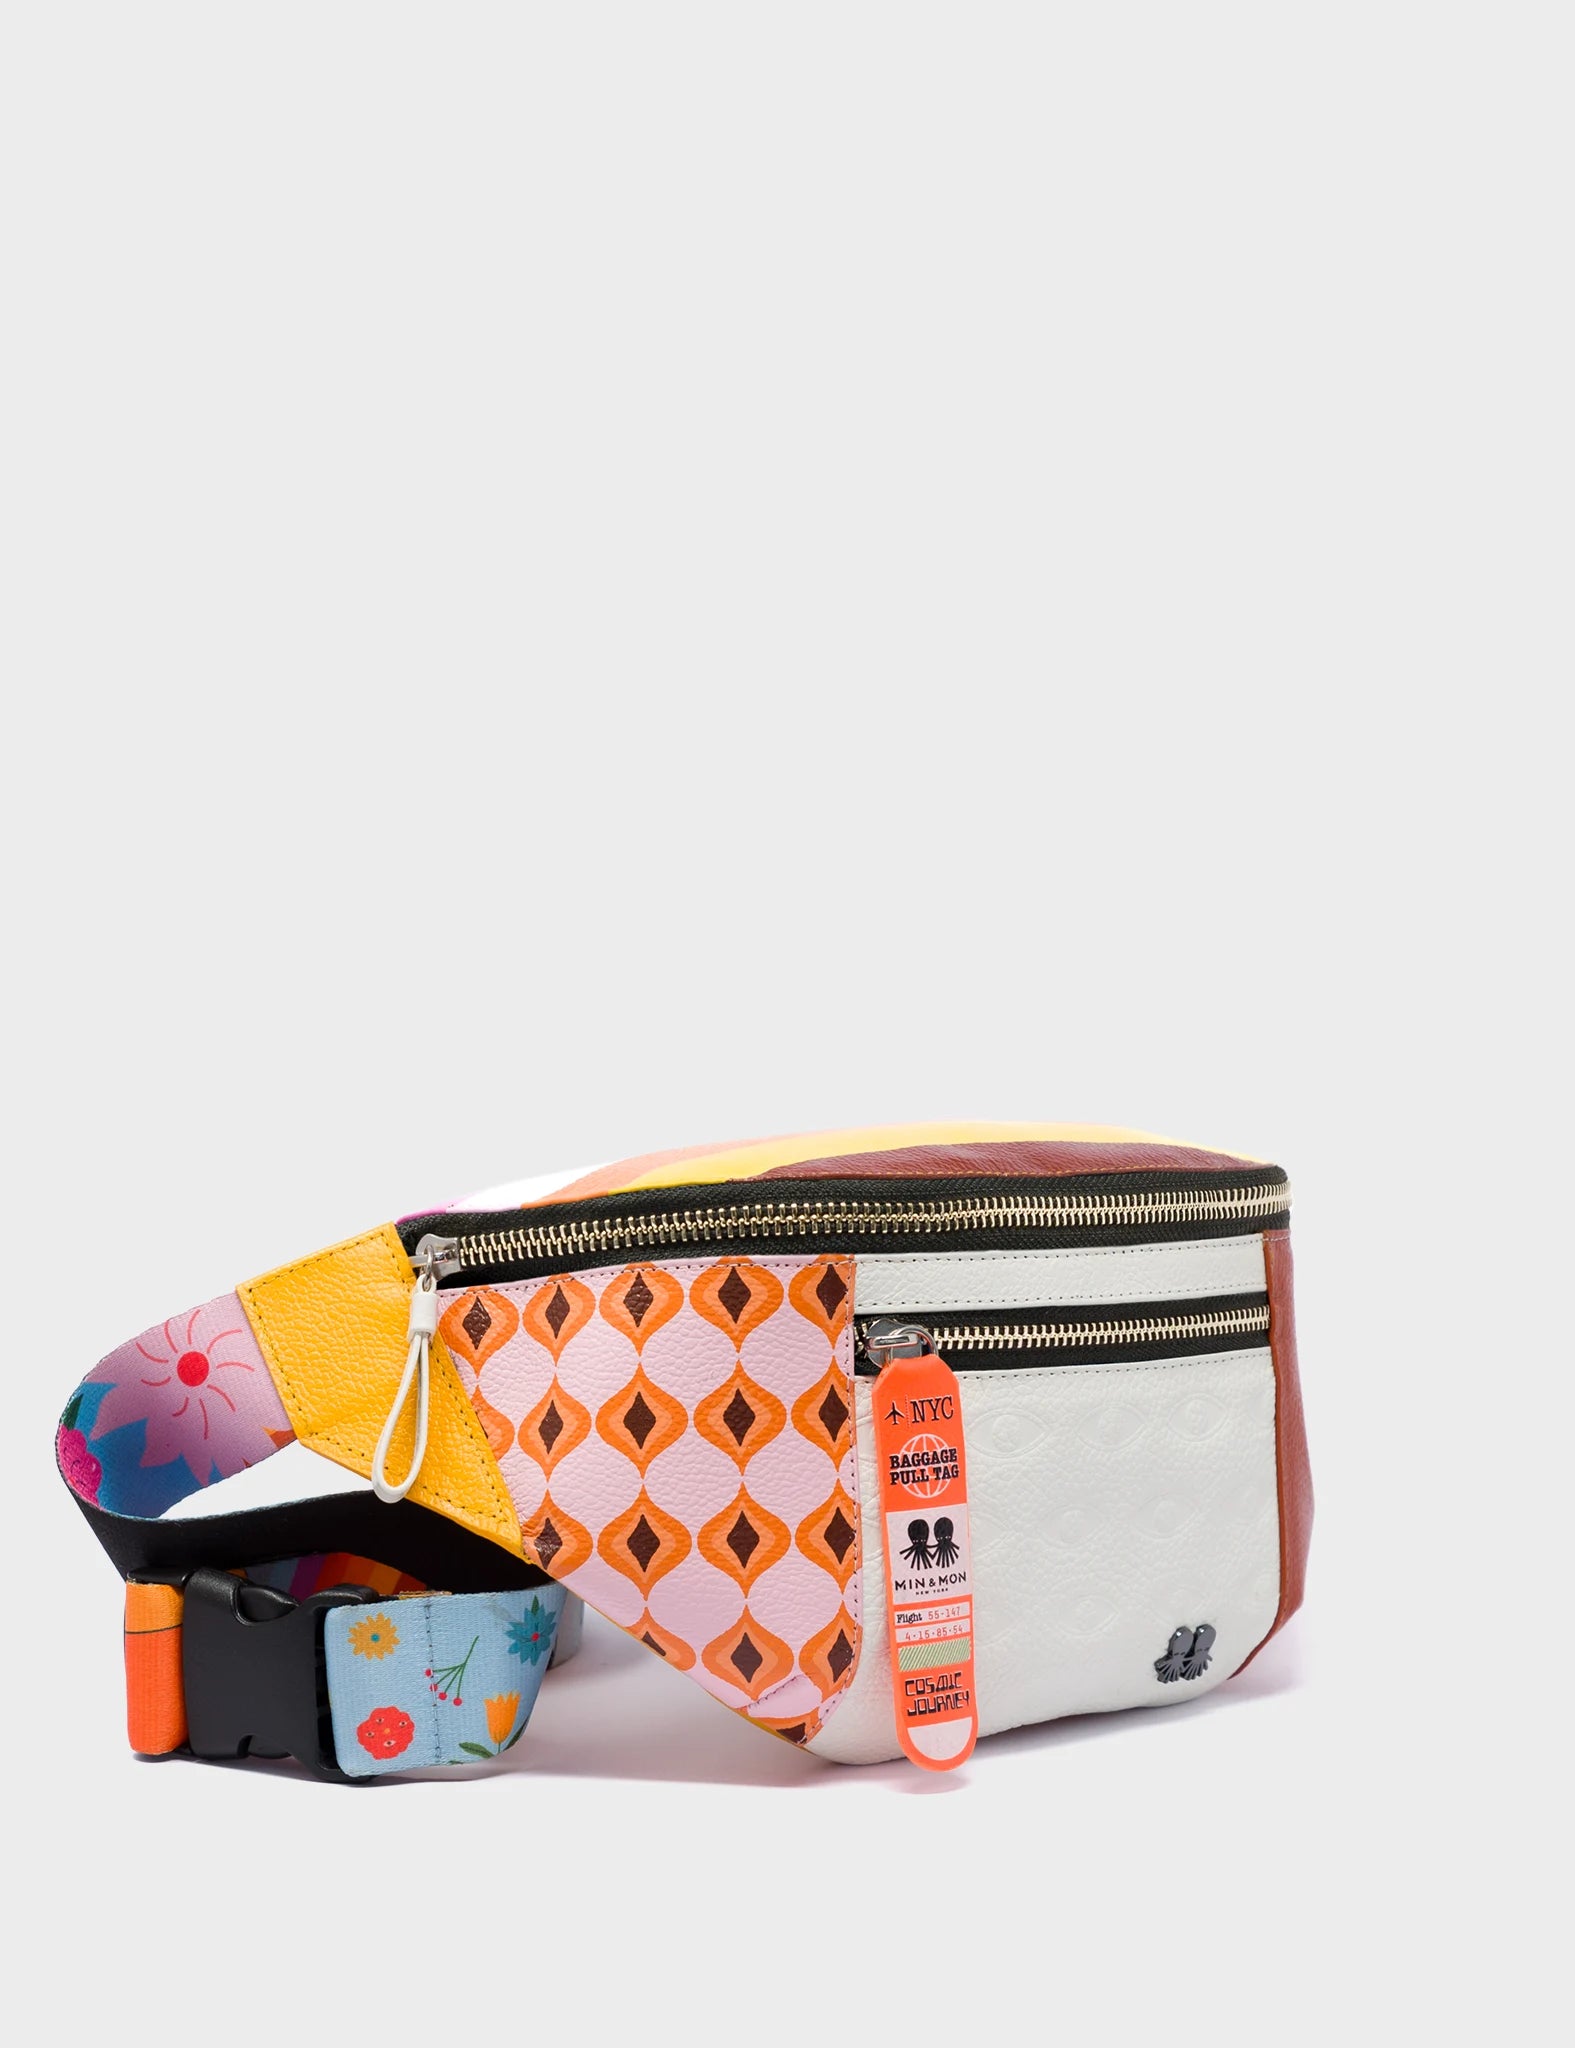 Fanny Pack Cream And Marigold Leather - Eyes Pattern Debossed